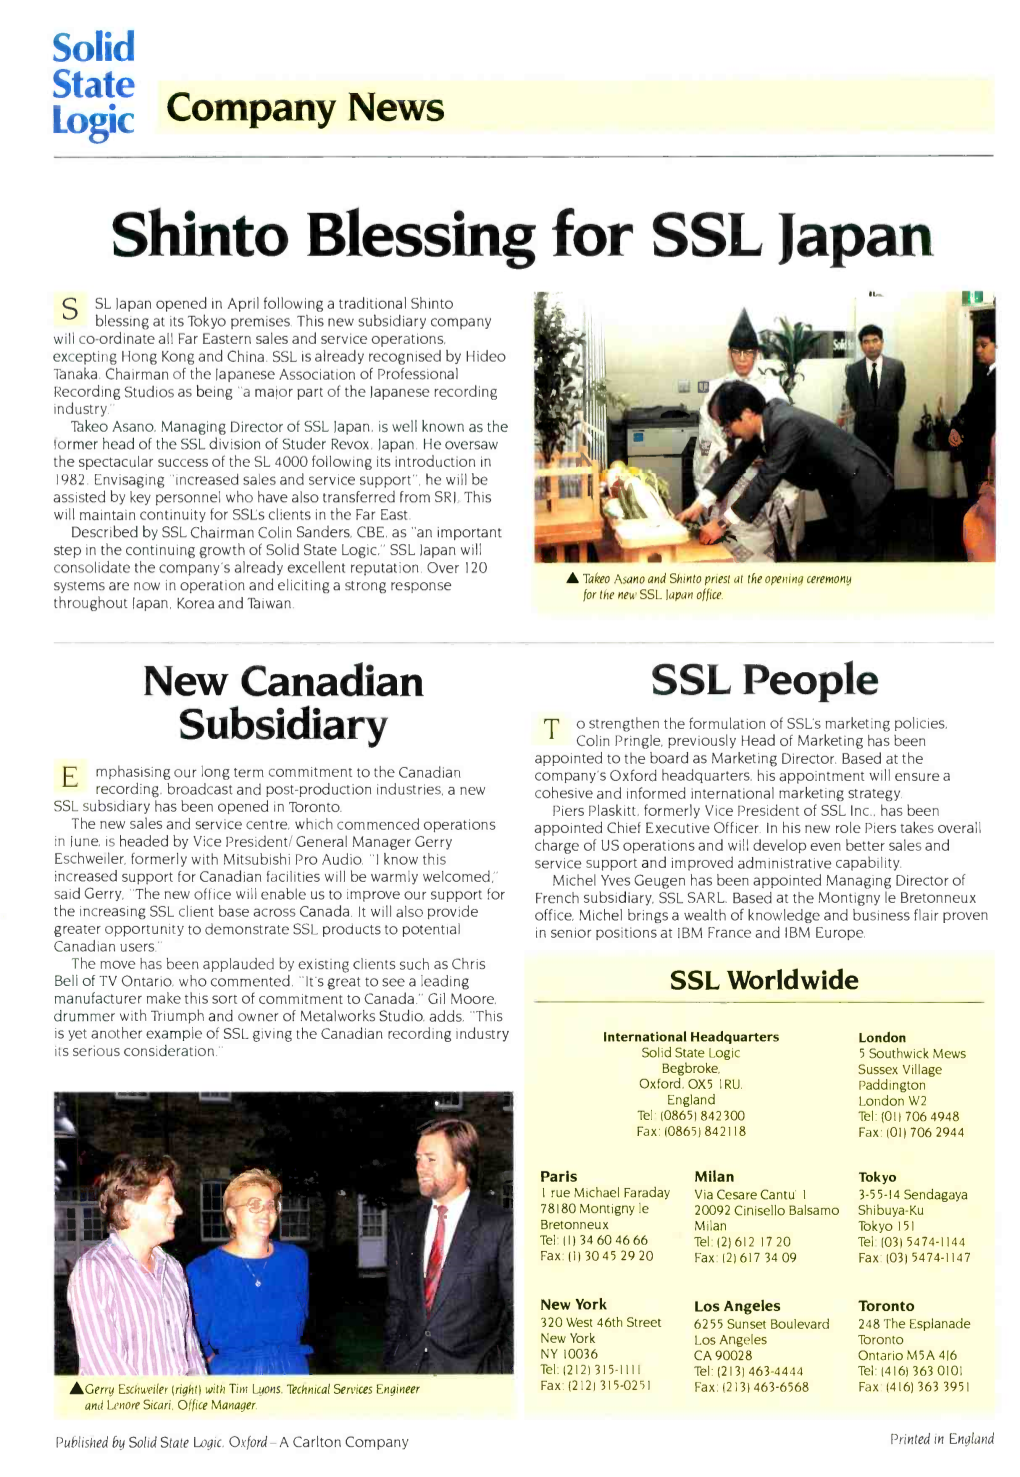 Shinto Blessing for SSL Japan